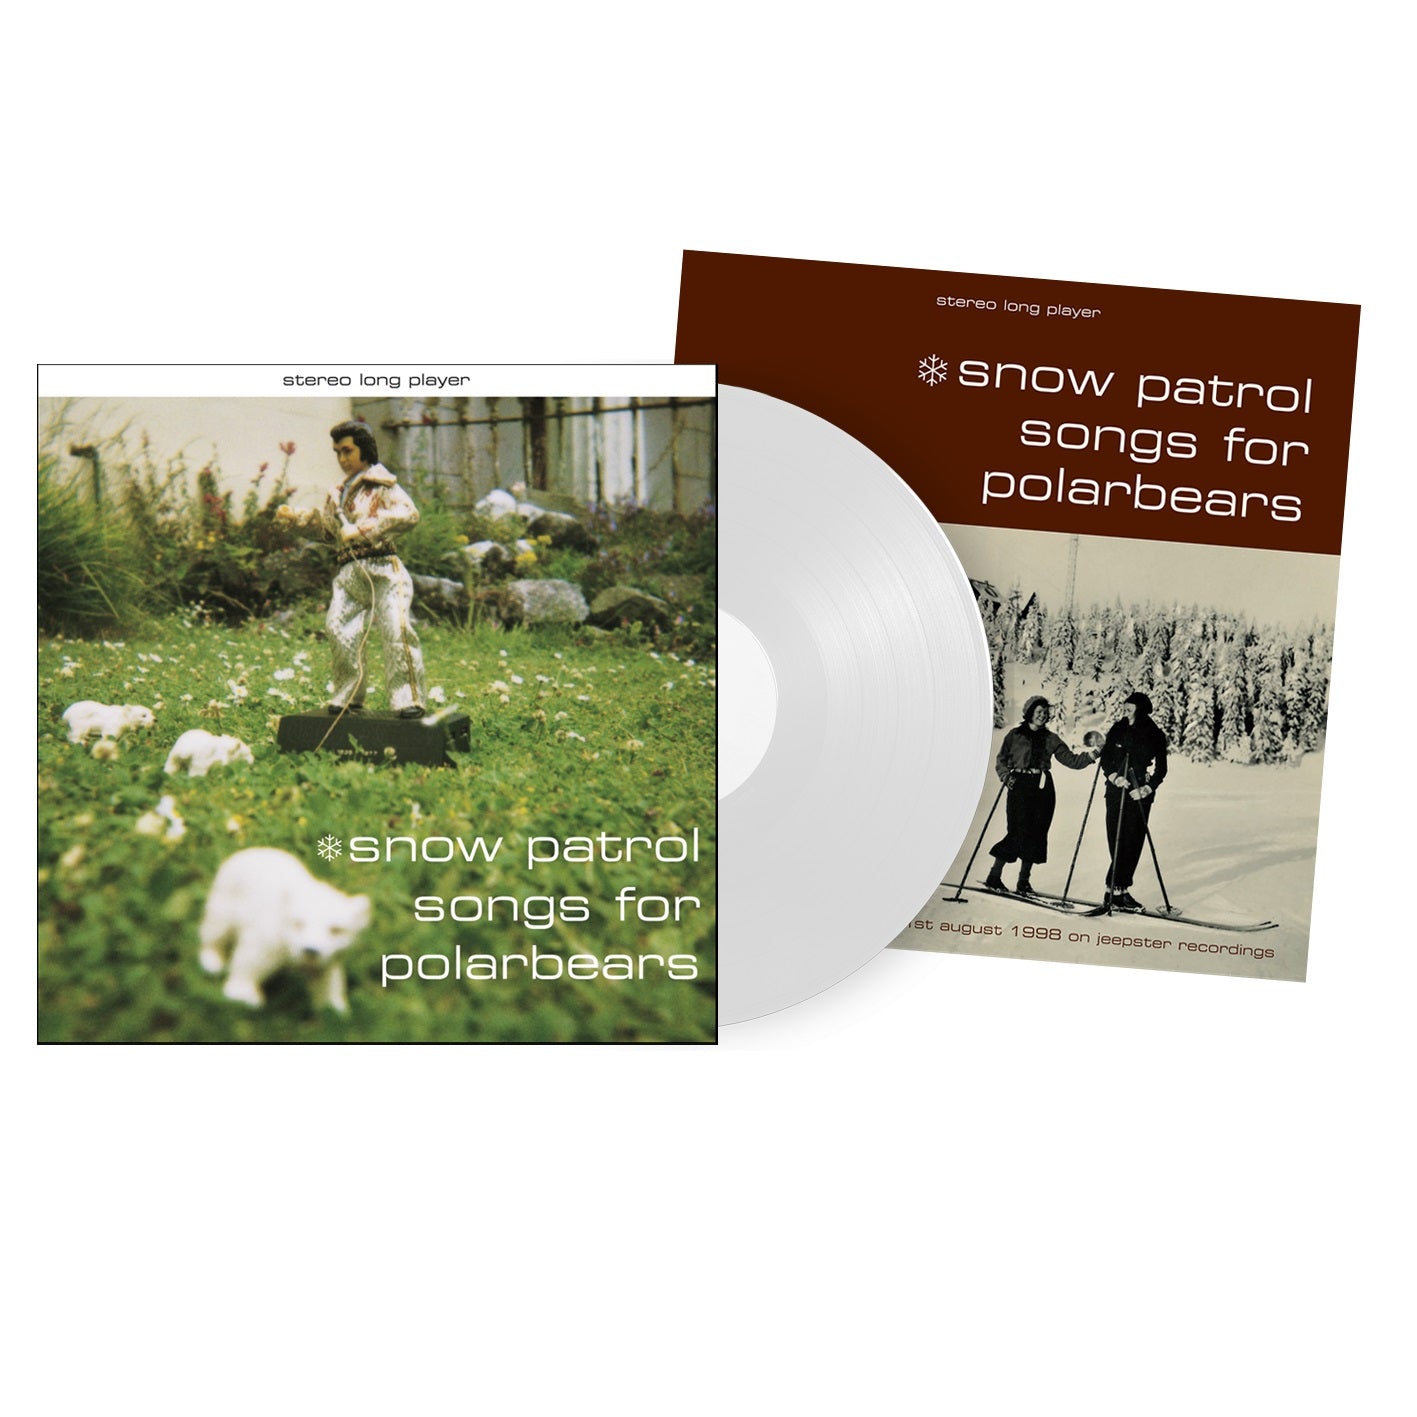 Snow Patrol - Songs for Polarbears (25th Anniversary Edition): Limited Arctic Pearl White Vinyl LP + Art Print